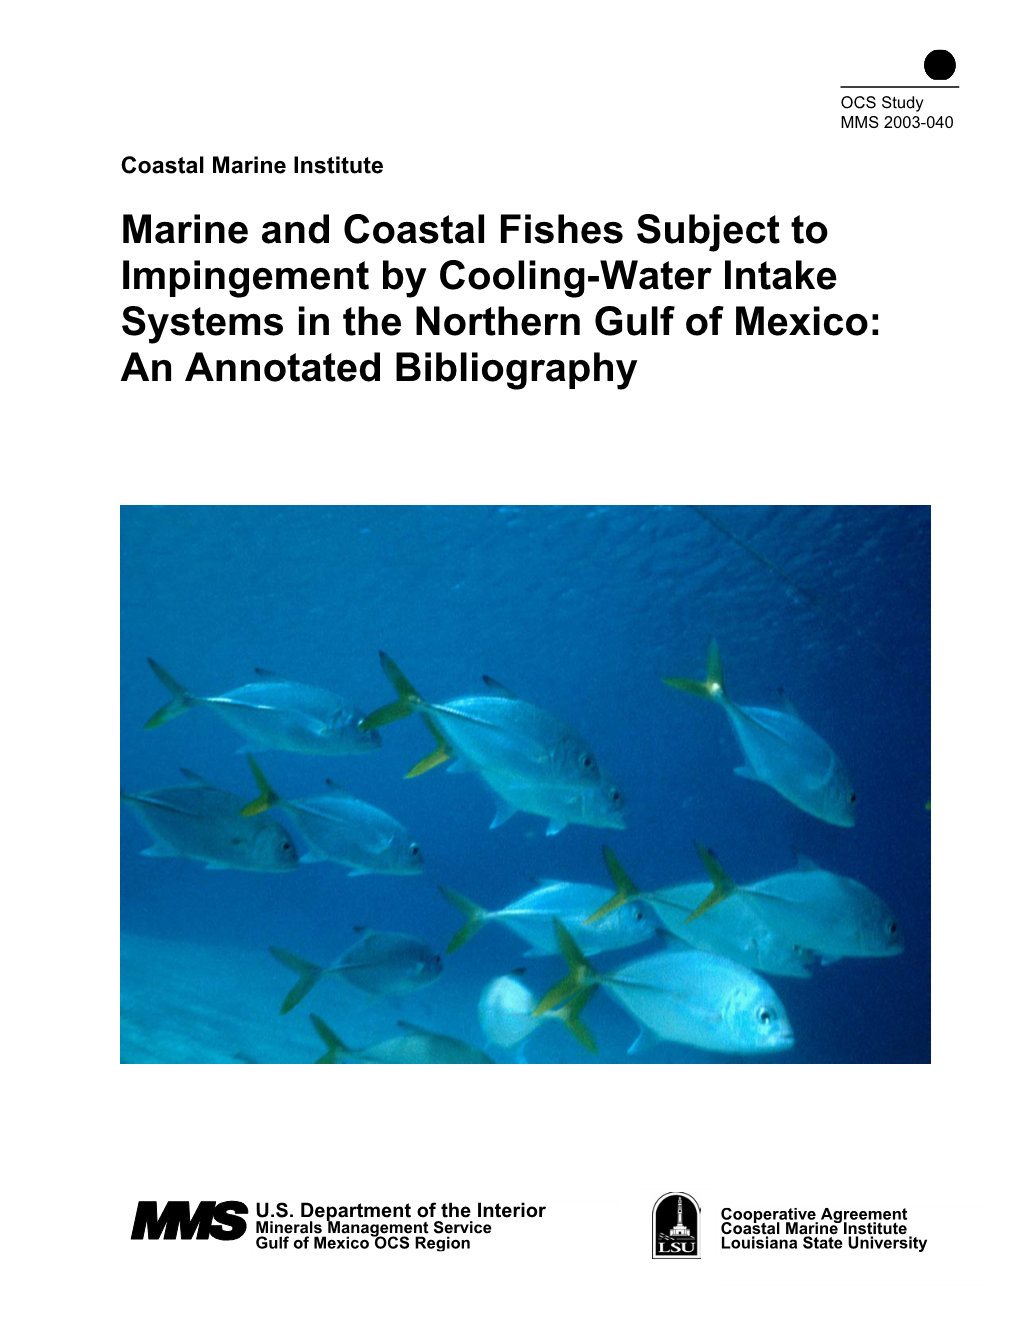 Marine and Coastal Fishes Subject to Impingement by Cooling-Water Intake Systems in the Northern Gulf of Mexico: an Annotated Bibliography